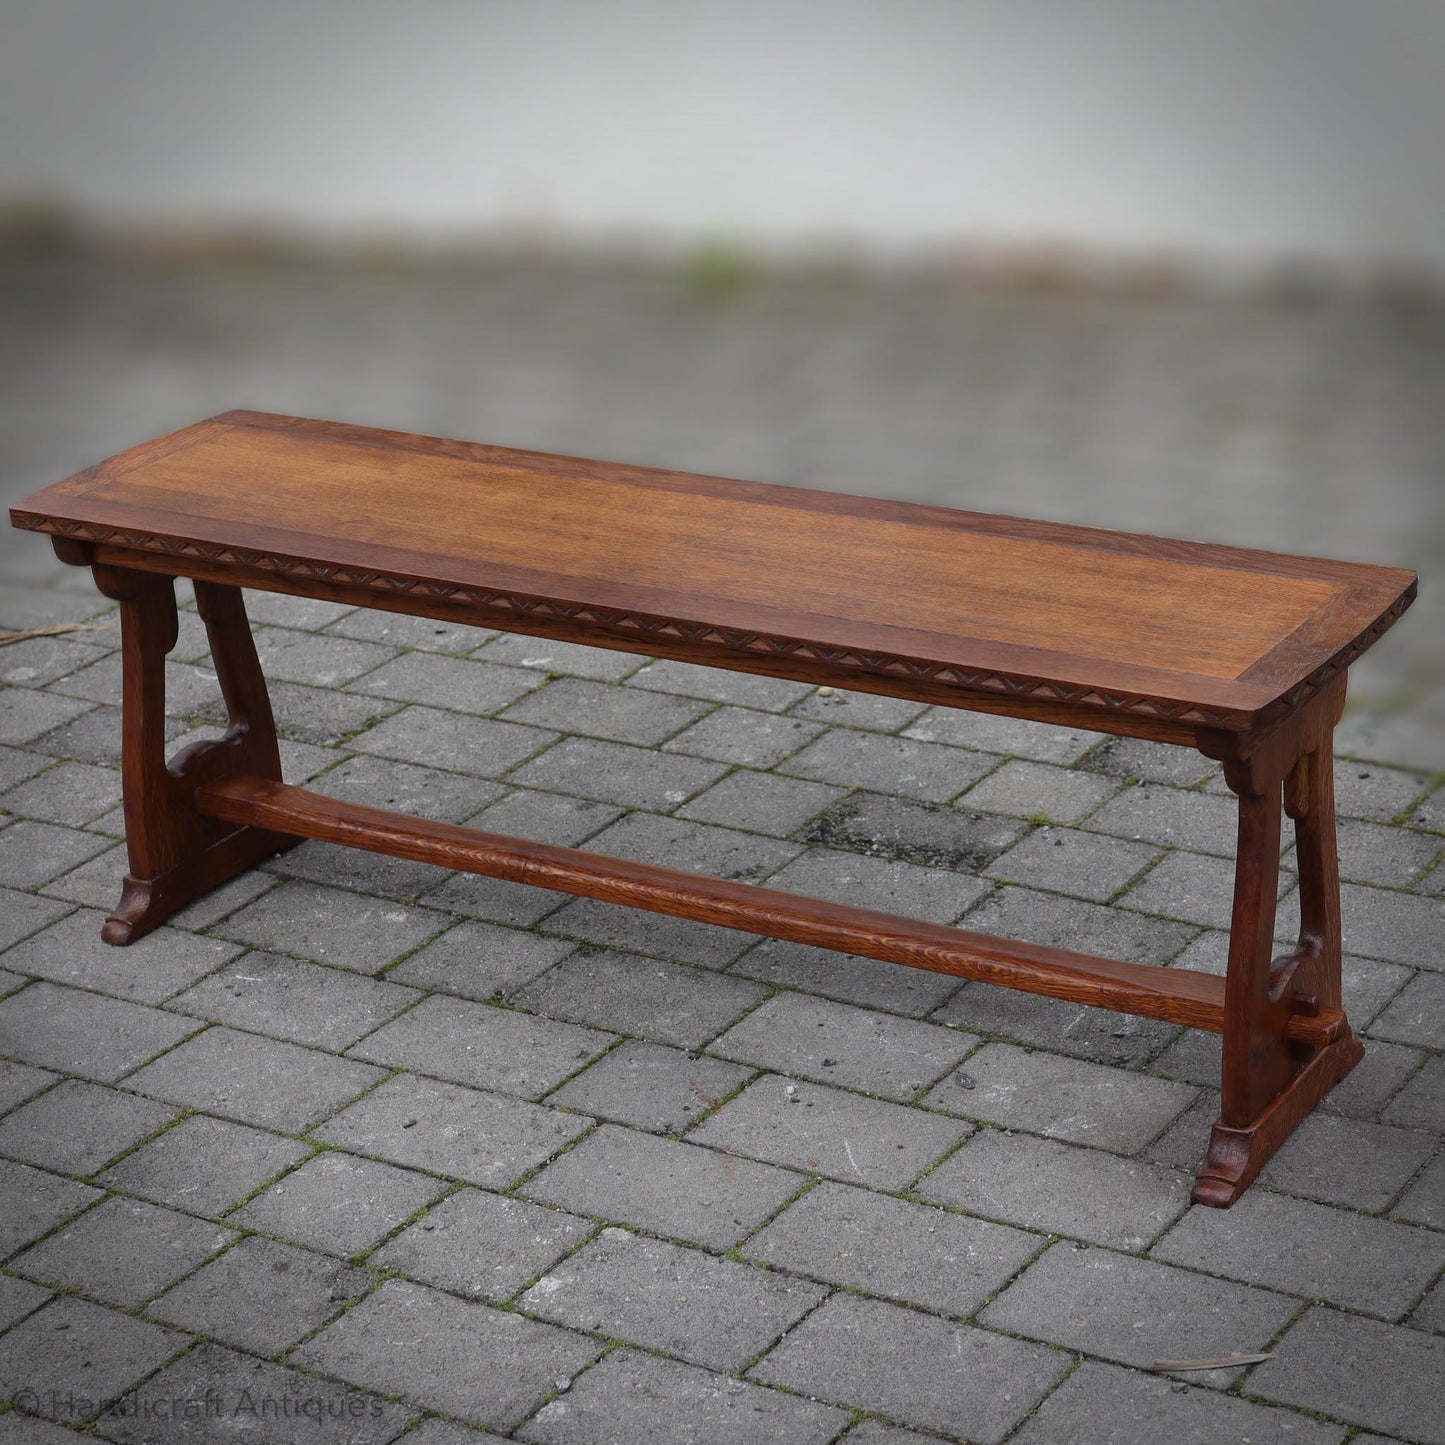  Arts & Crafts Cotswold School English Oak Dining Table and Benches